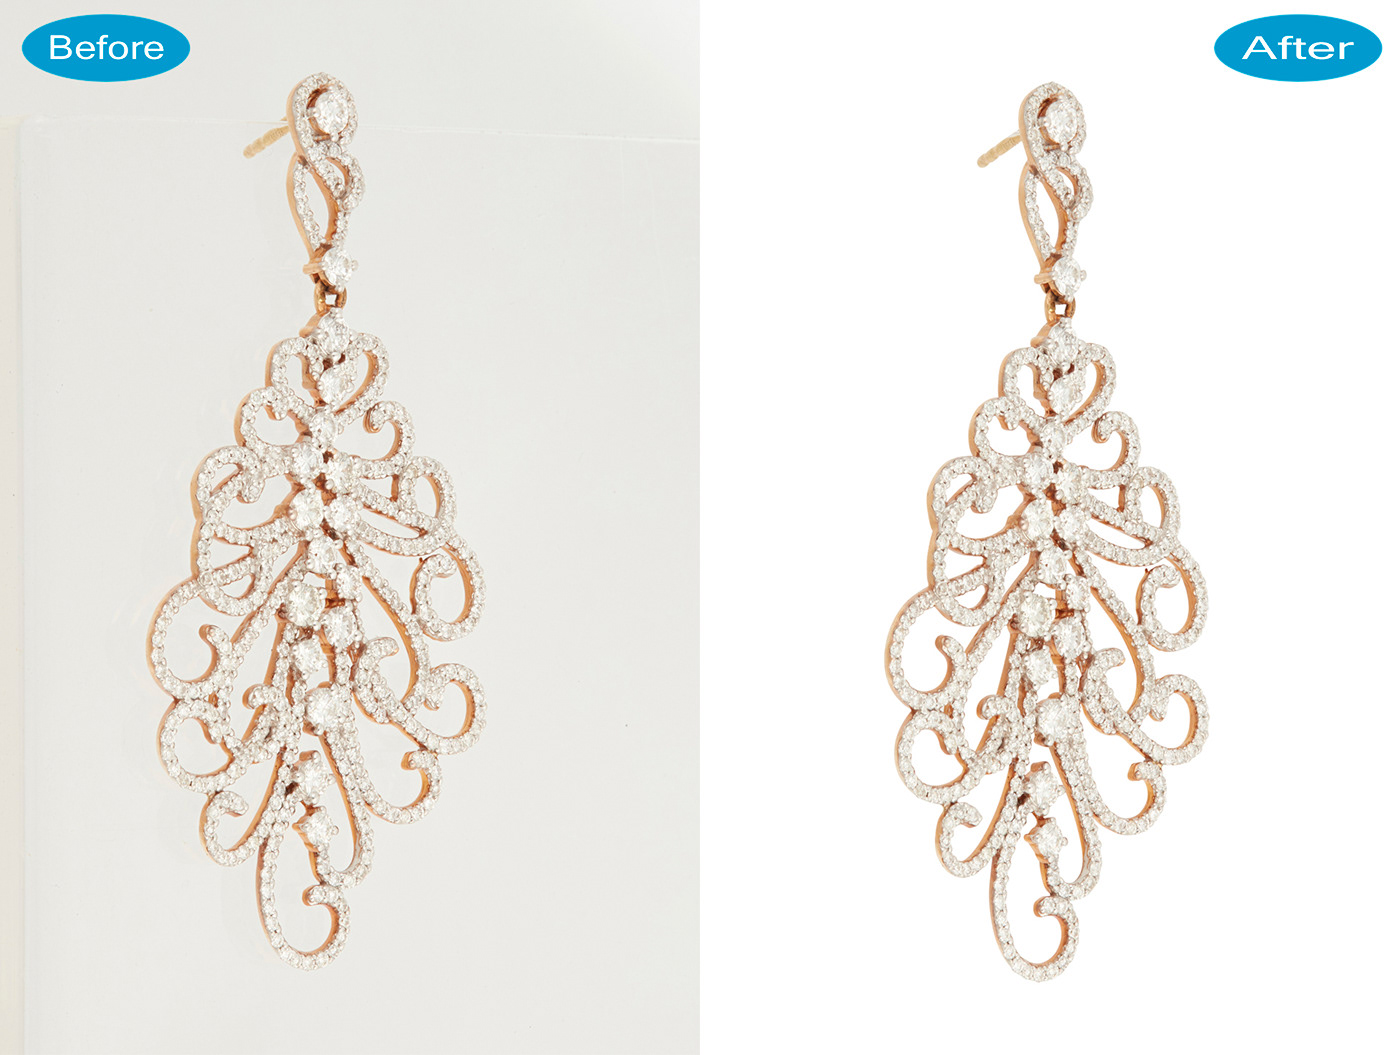 Clipping path and Background Remove Service
